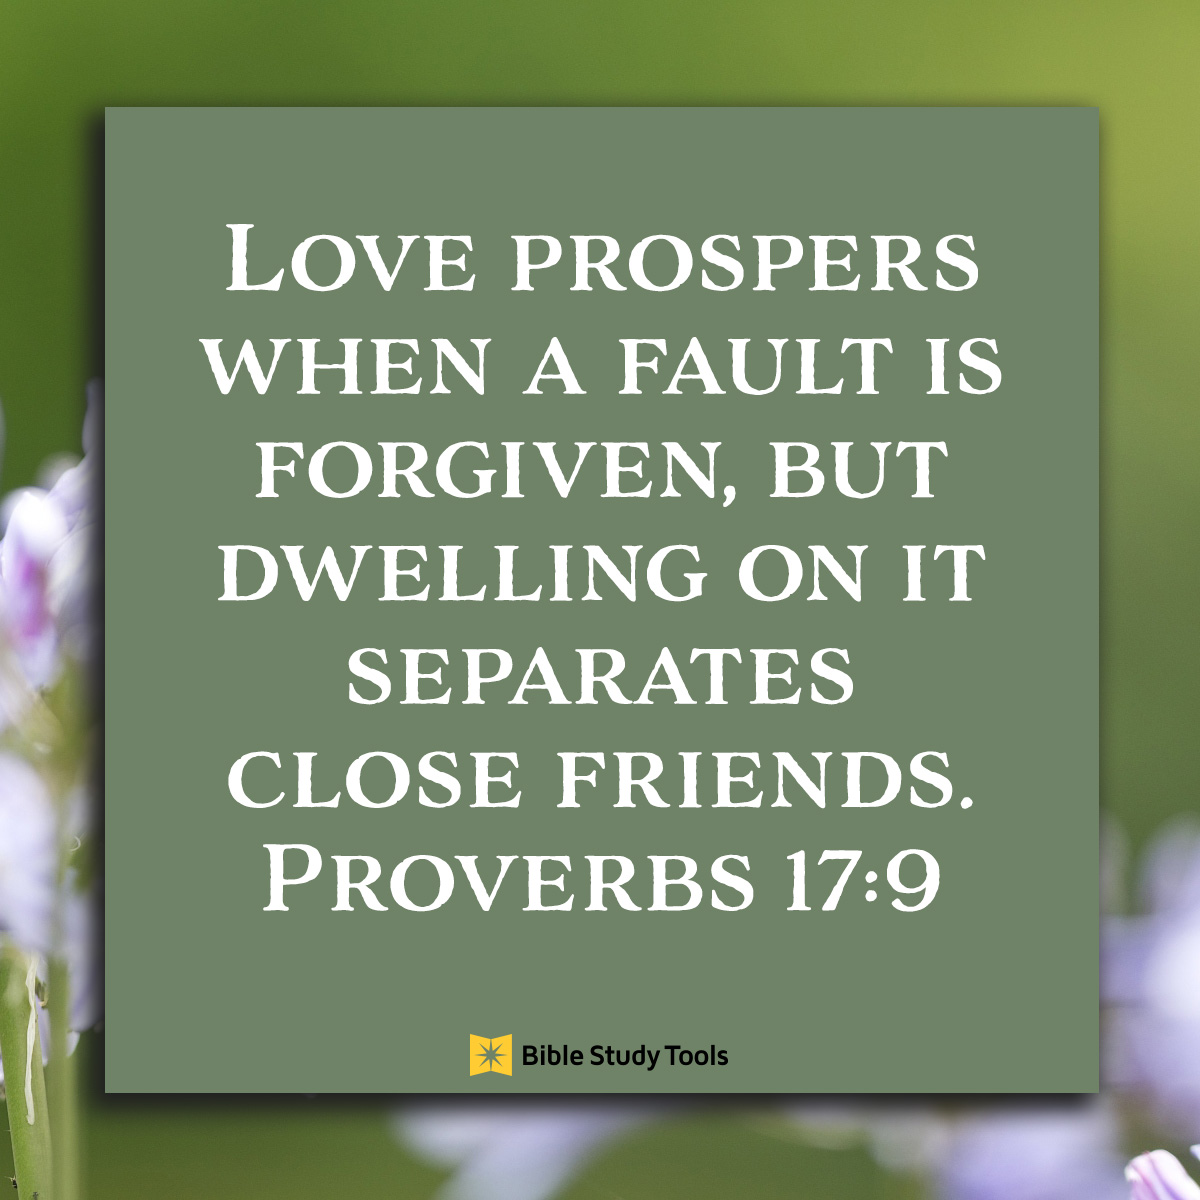 Proverbs 17:9; inspirational image